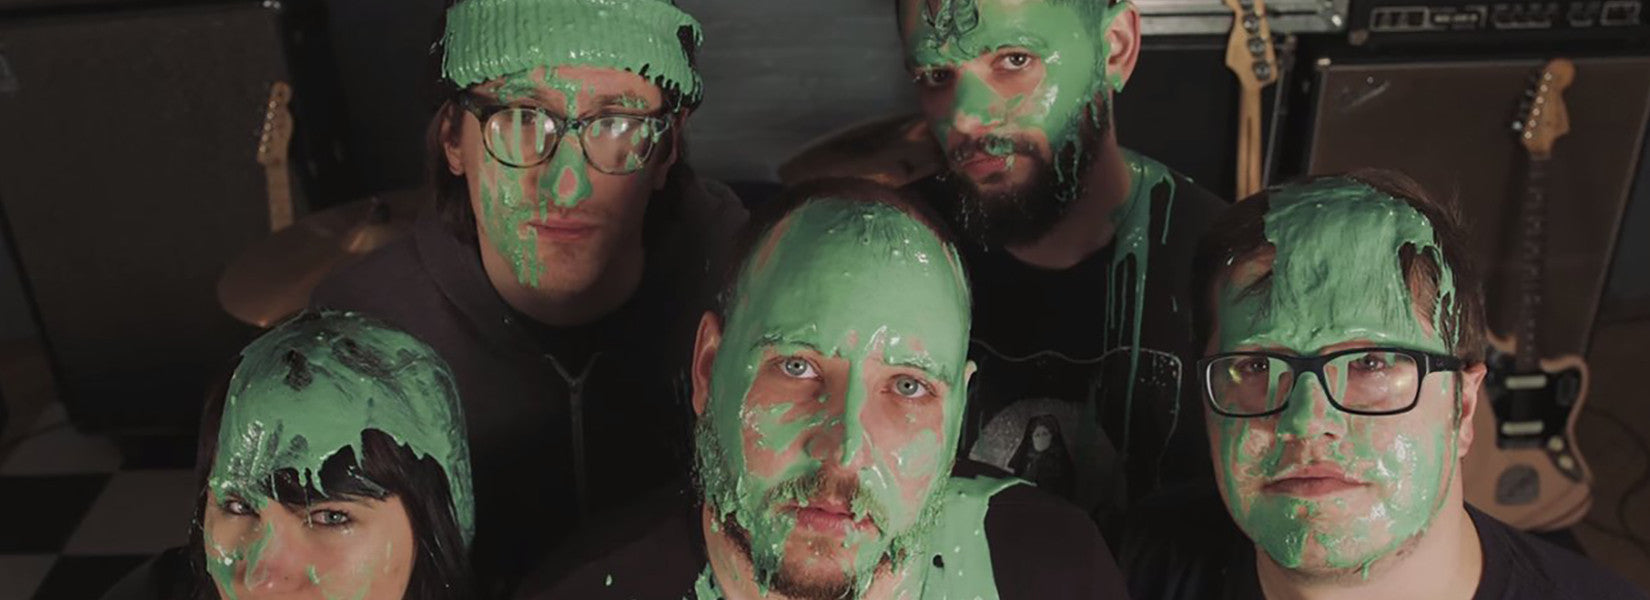 What Gives Shares New Music Video For "Slime Time Live"